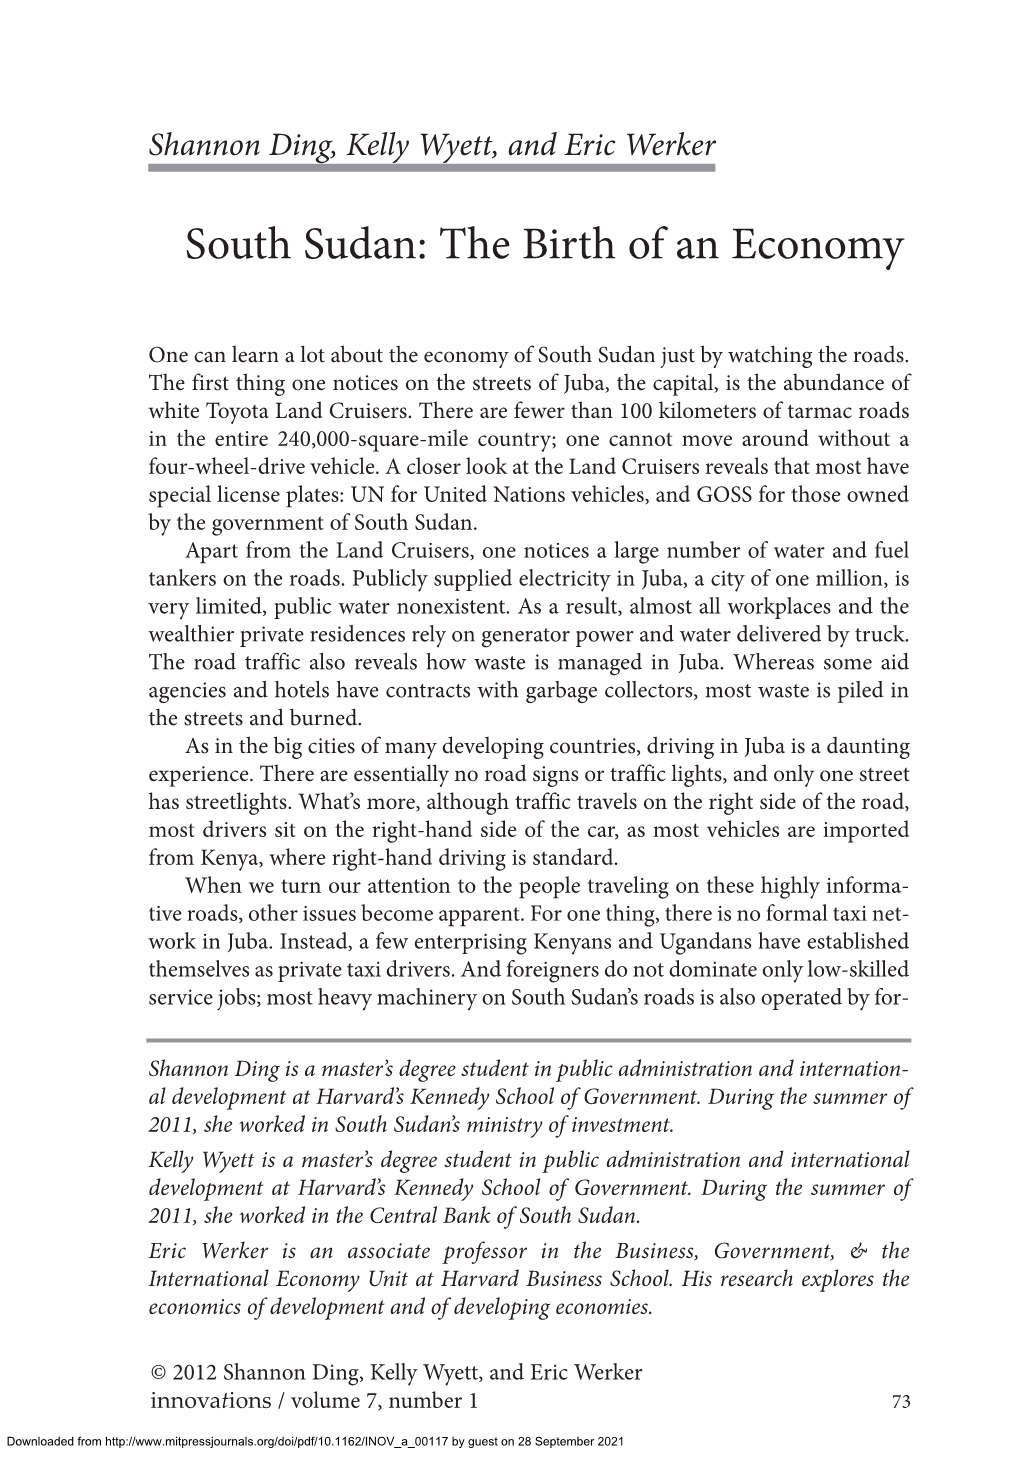 South Sudan: the Birth of an Economy